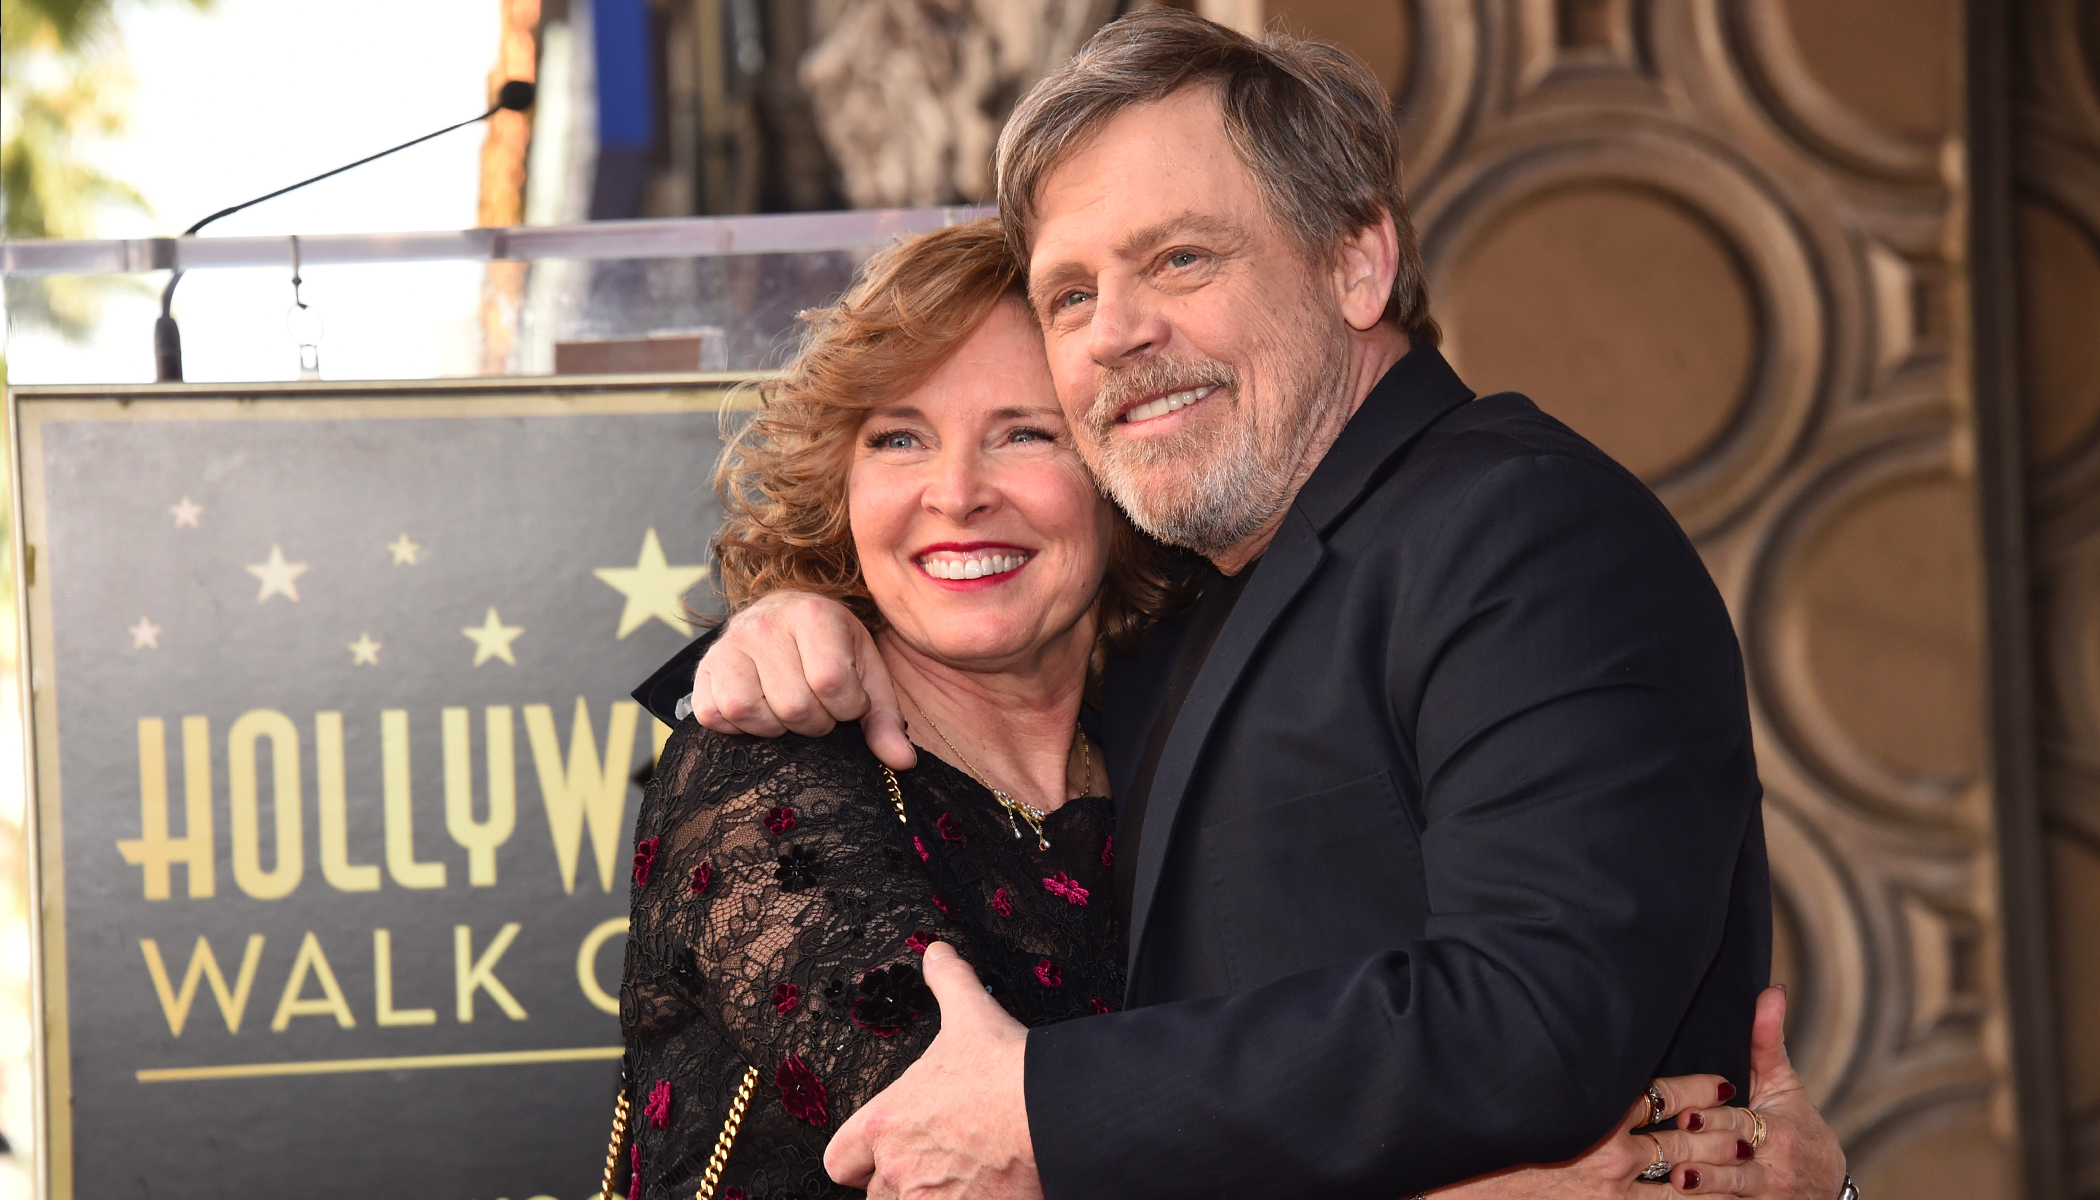 young Mark and Marilou - It's Mark Hamill